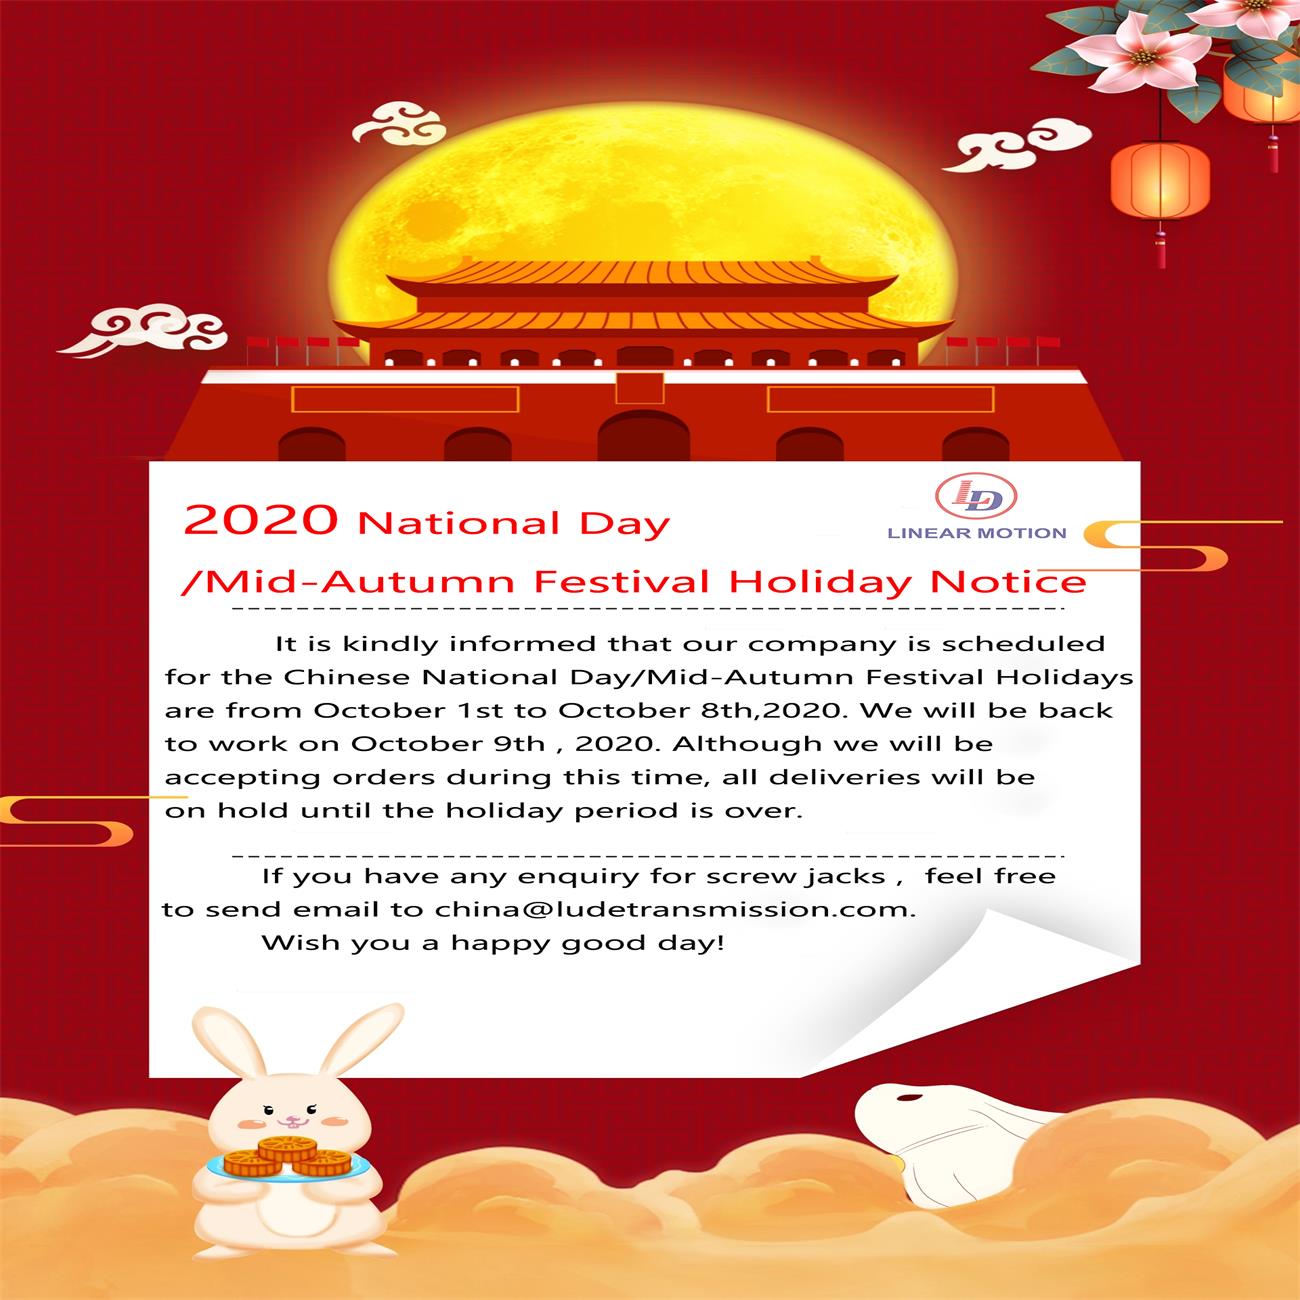 Chinese National Day/Mid-Autumn Festival holiday notice